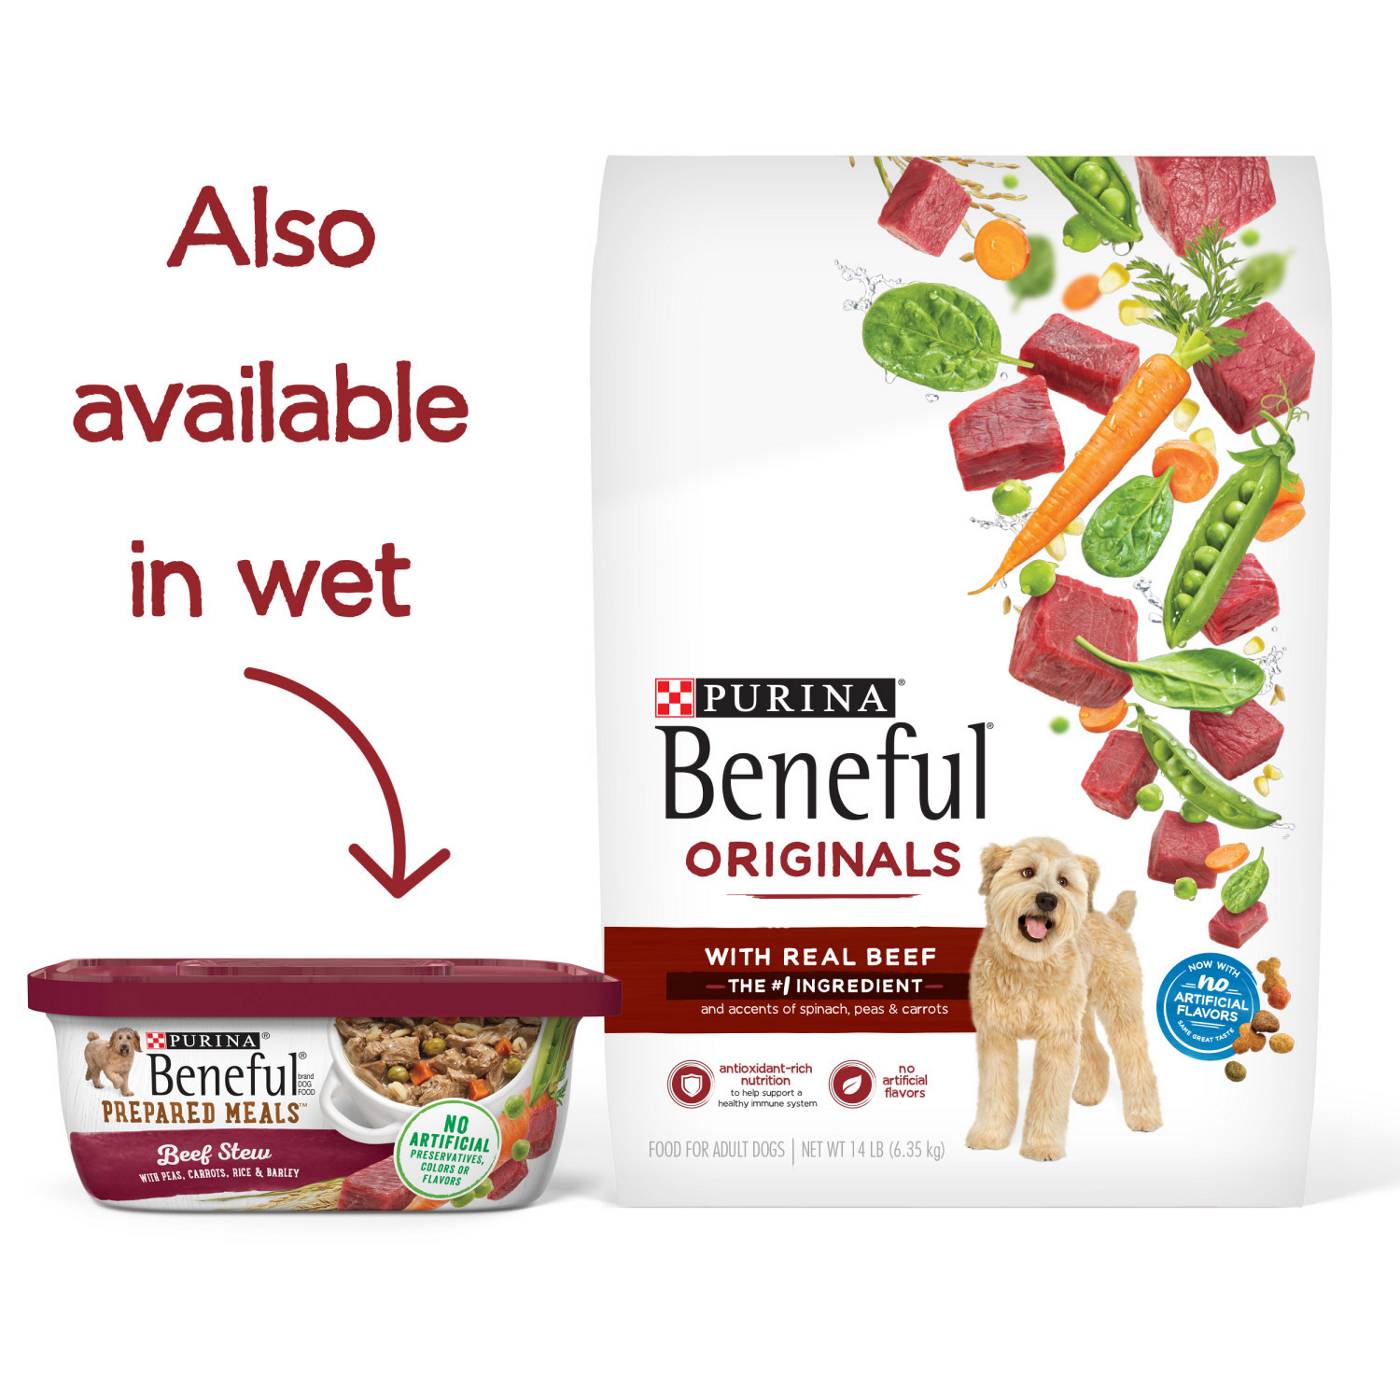 Beneful Purina Beneful Originals With Farm-Raised Beef, With Real Meat Dog Food; image 8 of 9